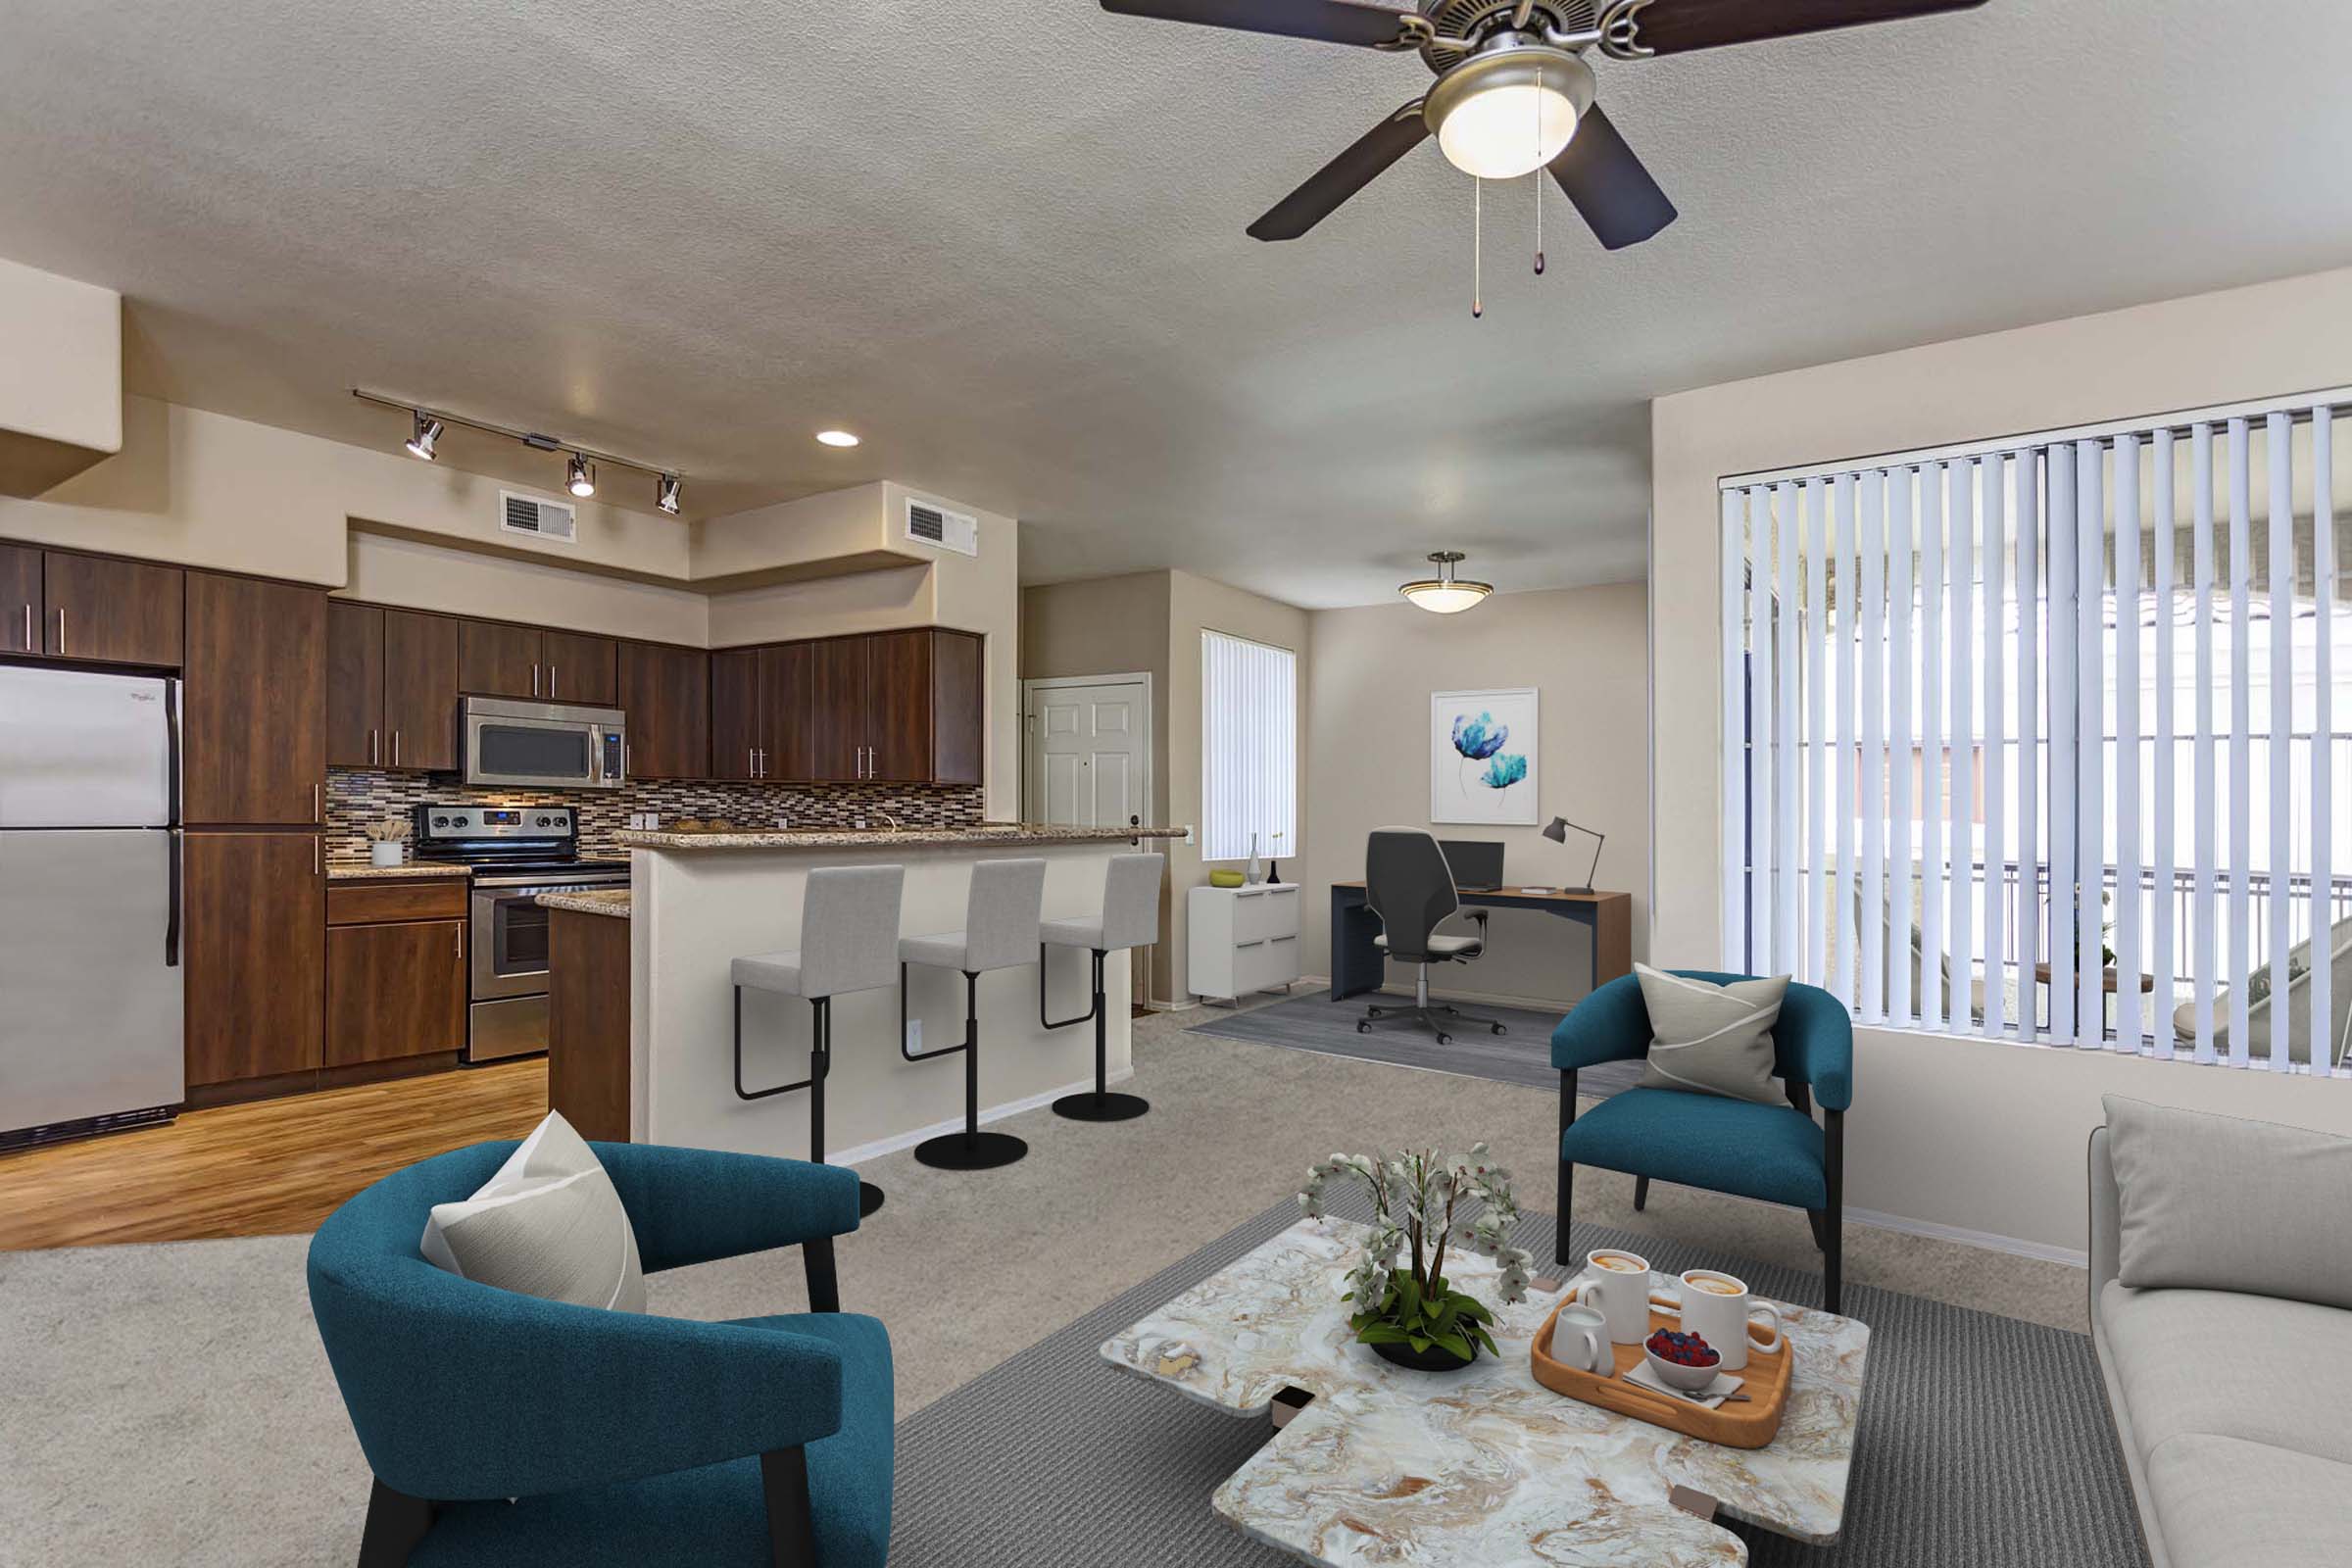 Camden Montierra Apartments Scottsdale AZ spacious open concept living room with ceiling fan near luxury kitchen and a space for a home office